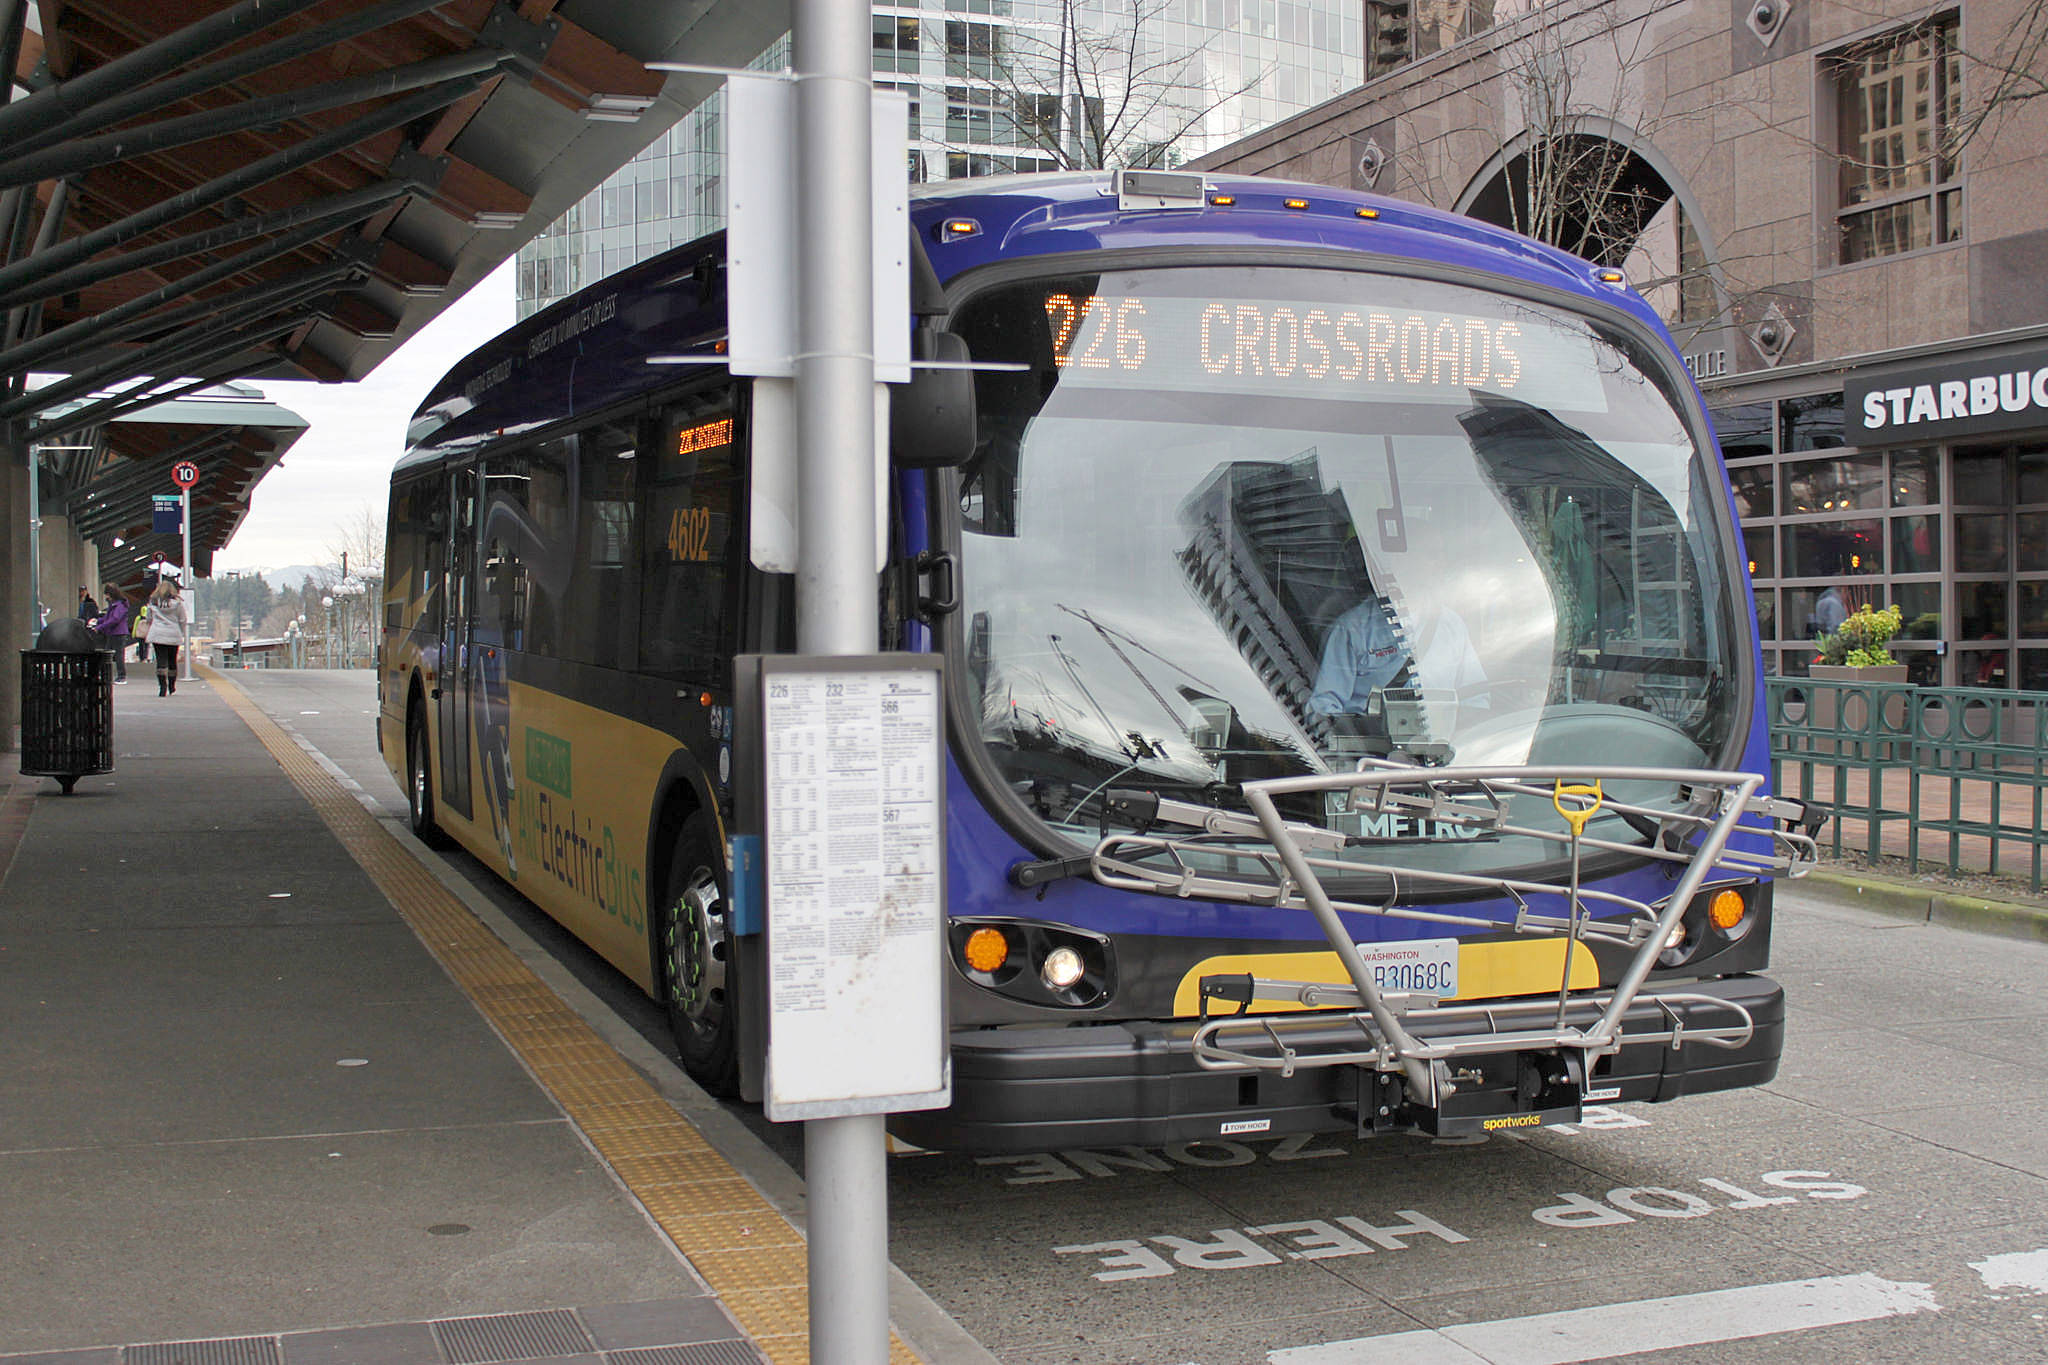 While King County Metro has been testing out several trial electric buses since since 2016, the agency aims to have a fully electric bus fleet by 2040. Photo by SounderBruce/Flickr